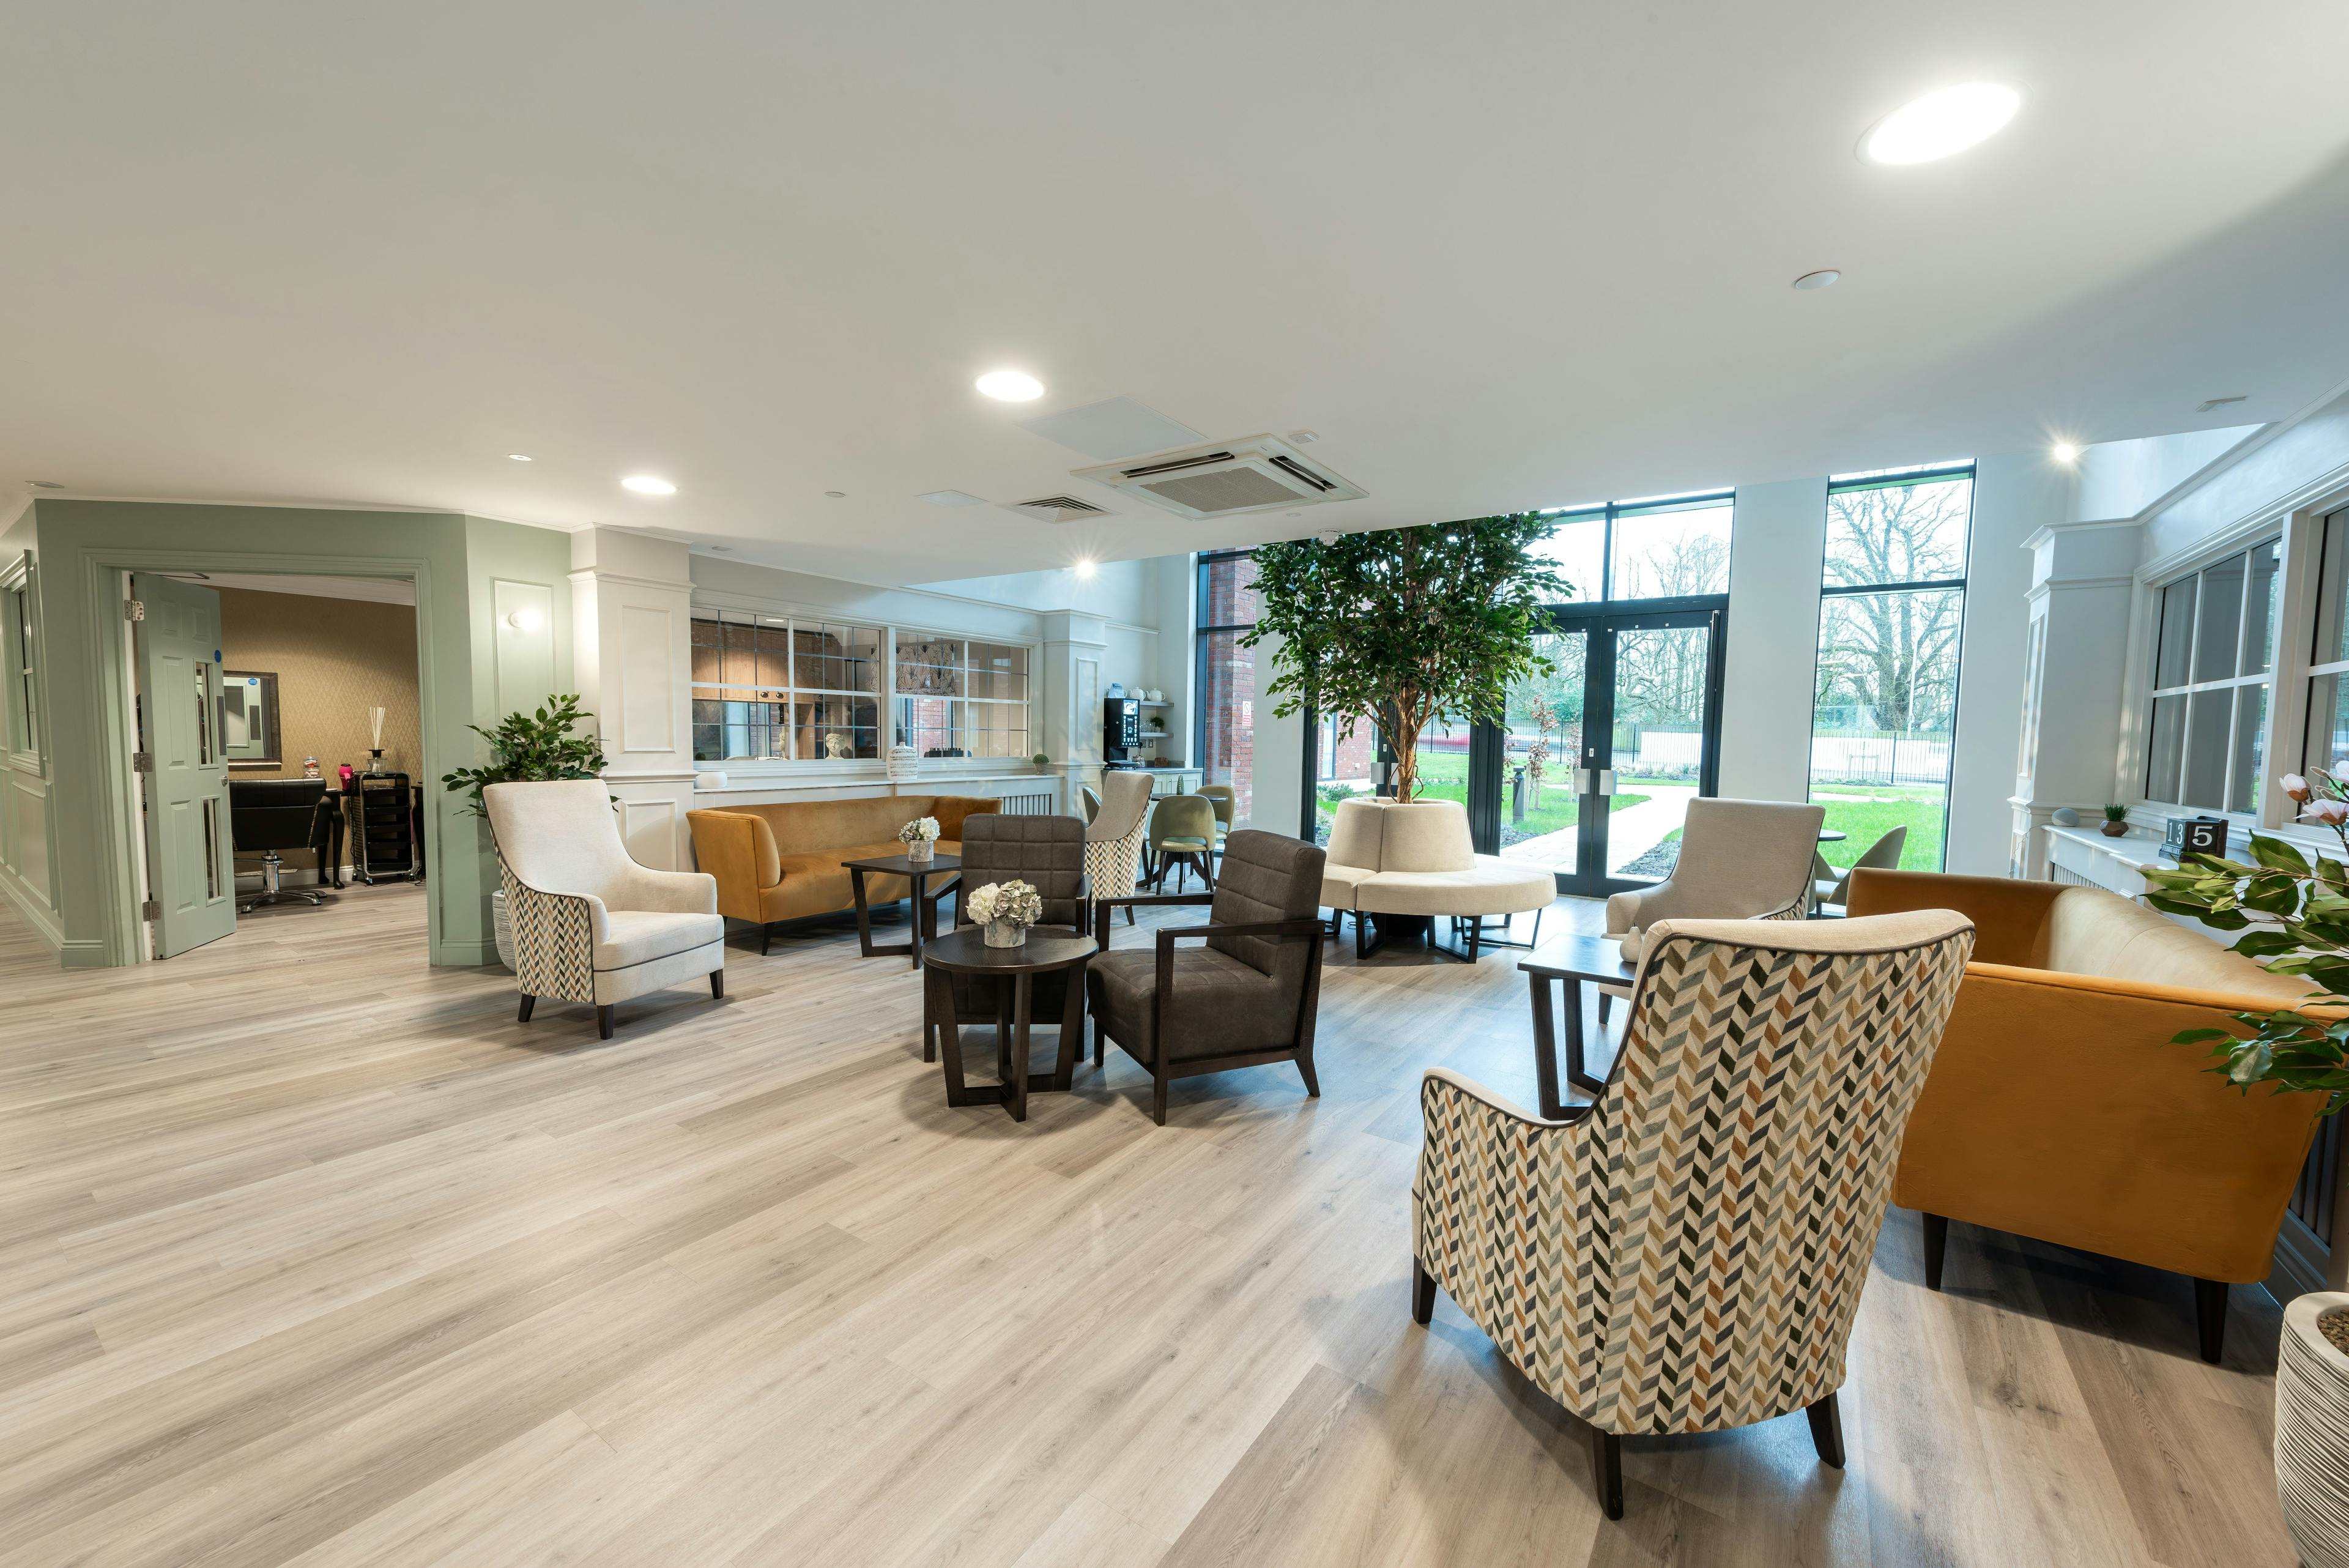 Lounge of Astley View care home in Chorley